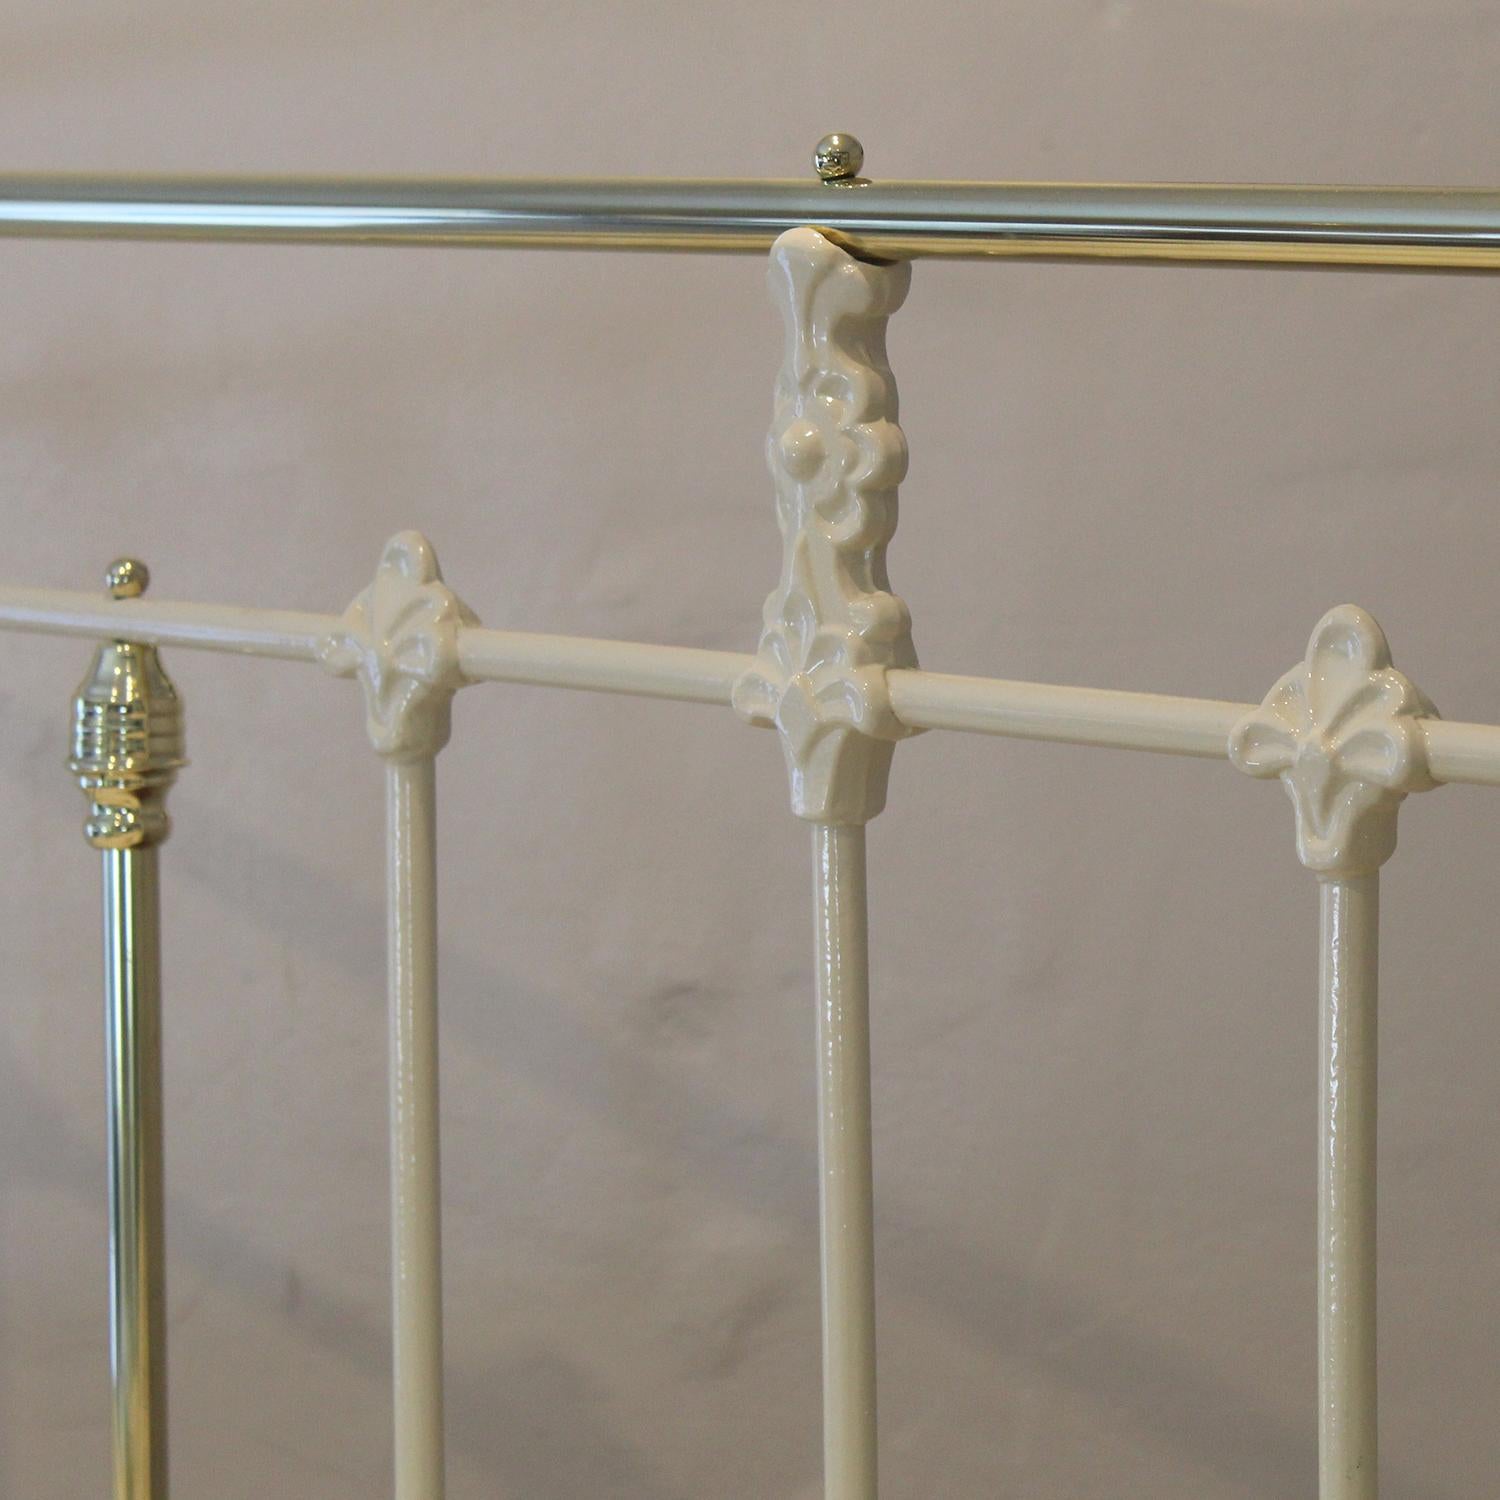 Brass and Iron Antique Bed in Cream, MK256 3